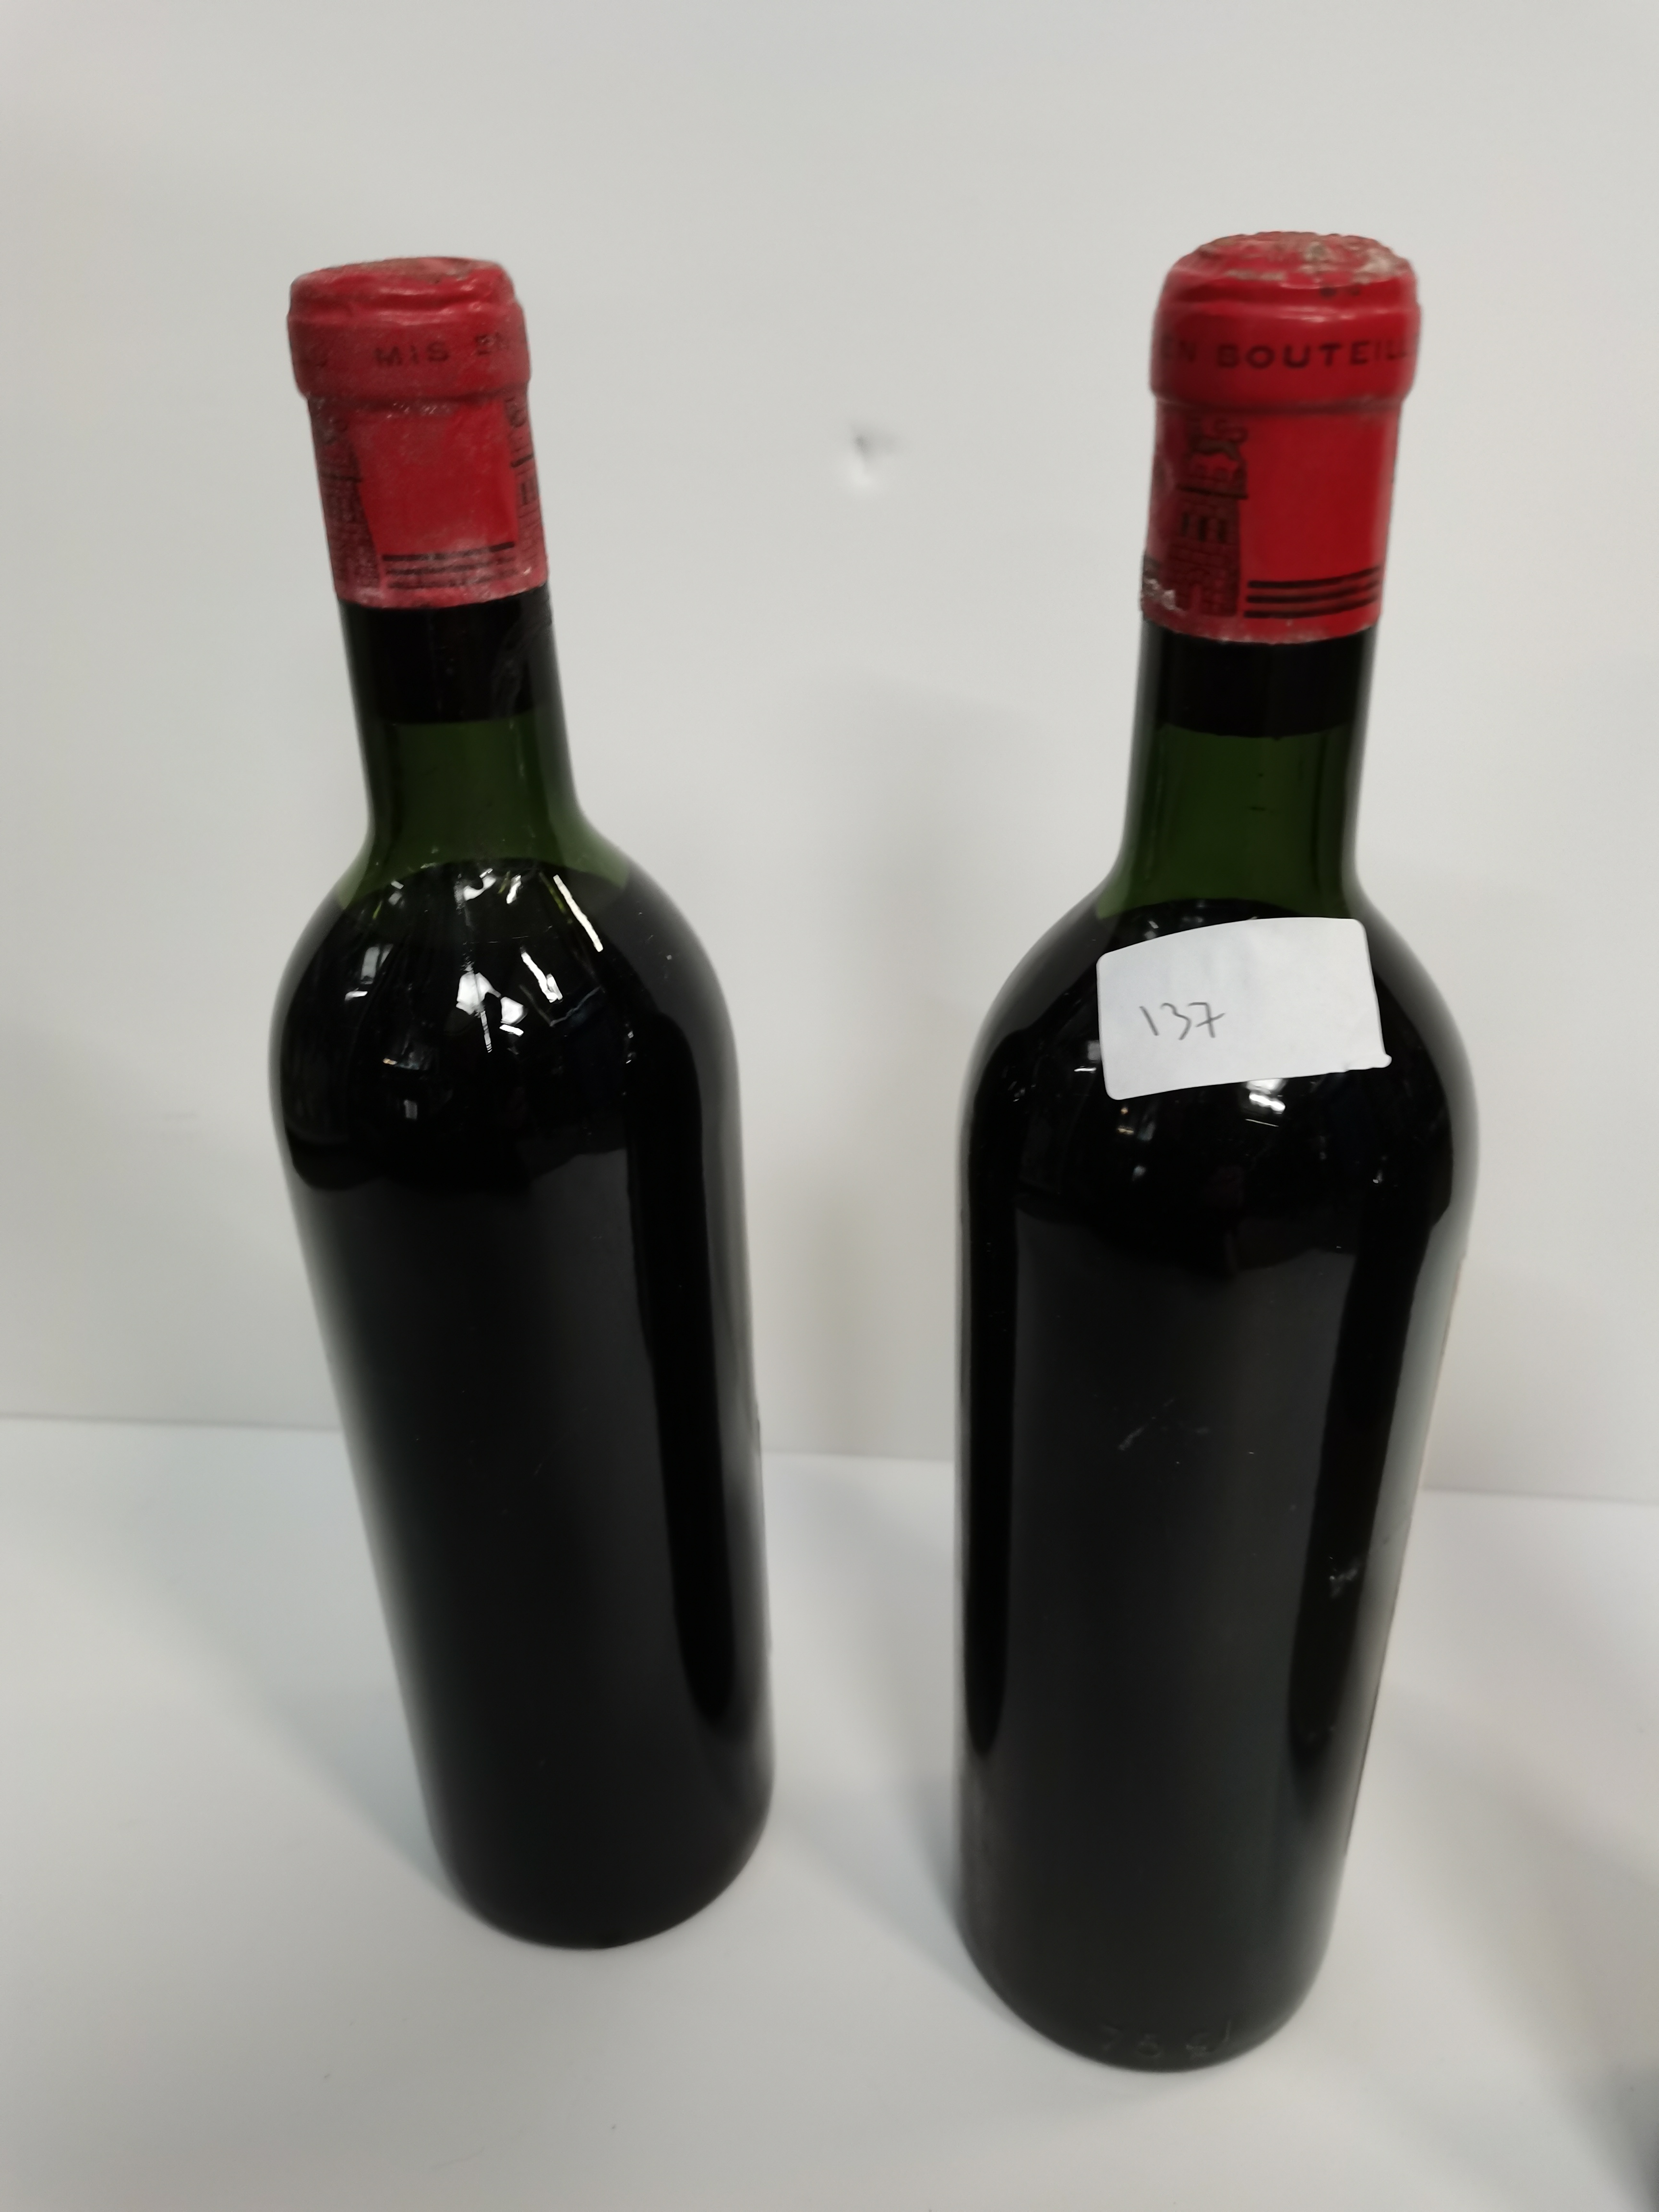 x2 bottles of Grand vin de Chateau Latour 1958 and a bottle of Dows port - Image 8 of 12